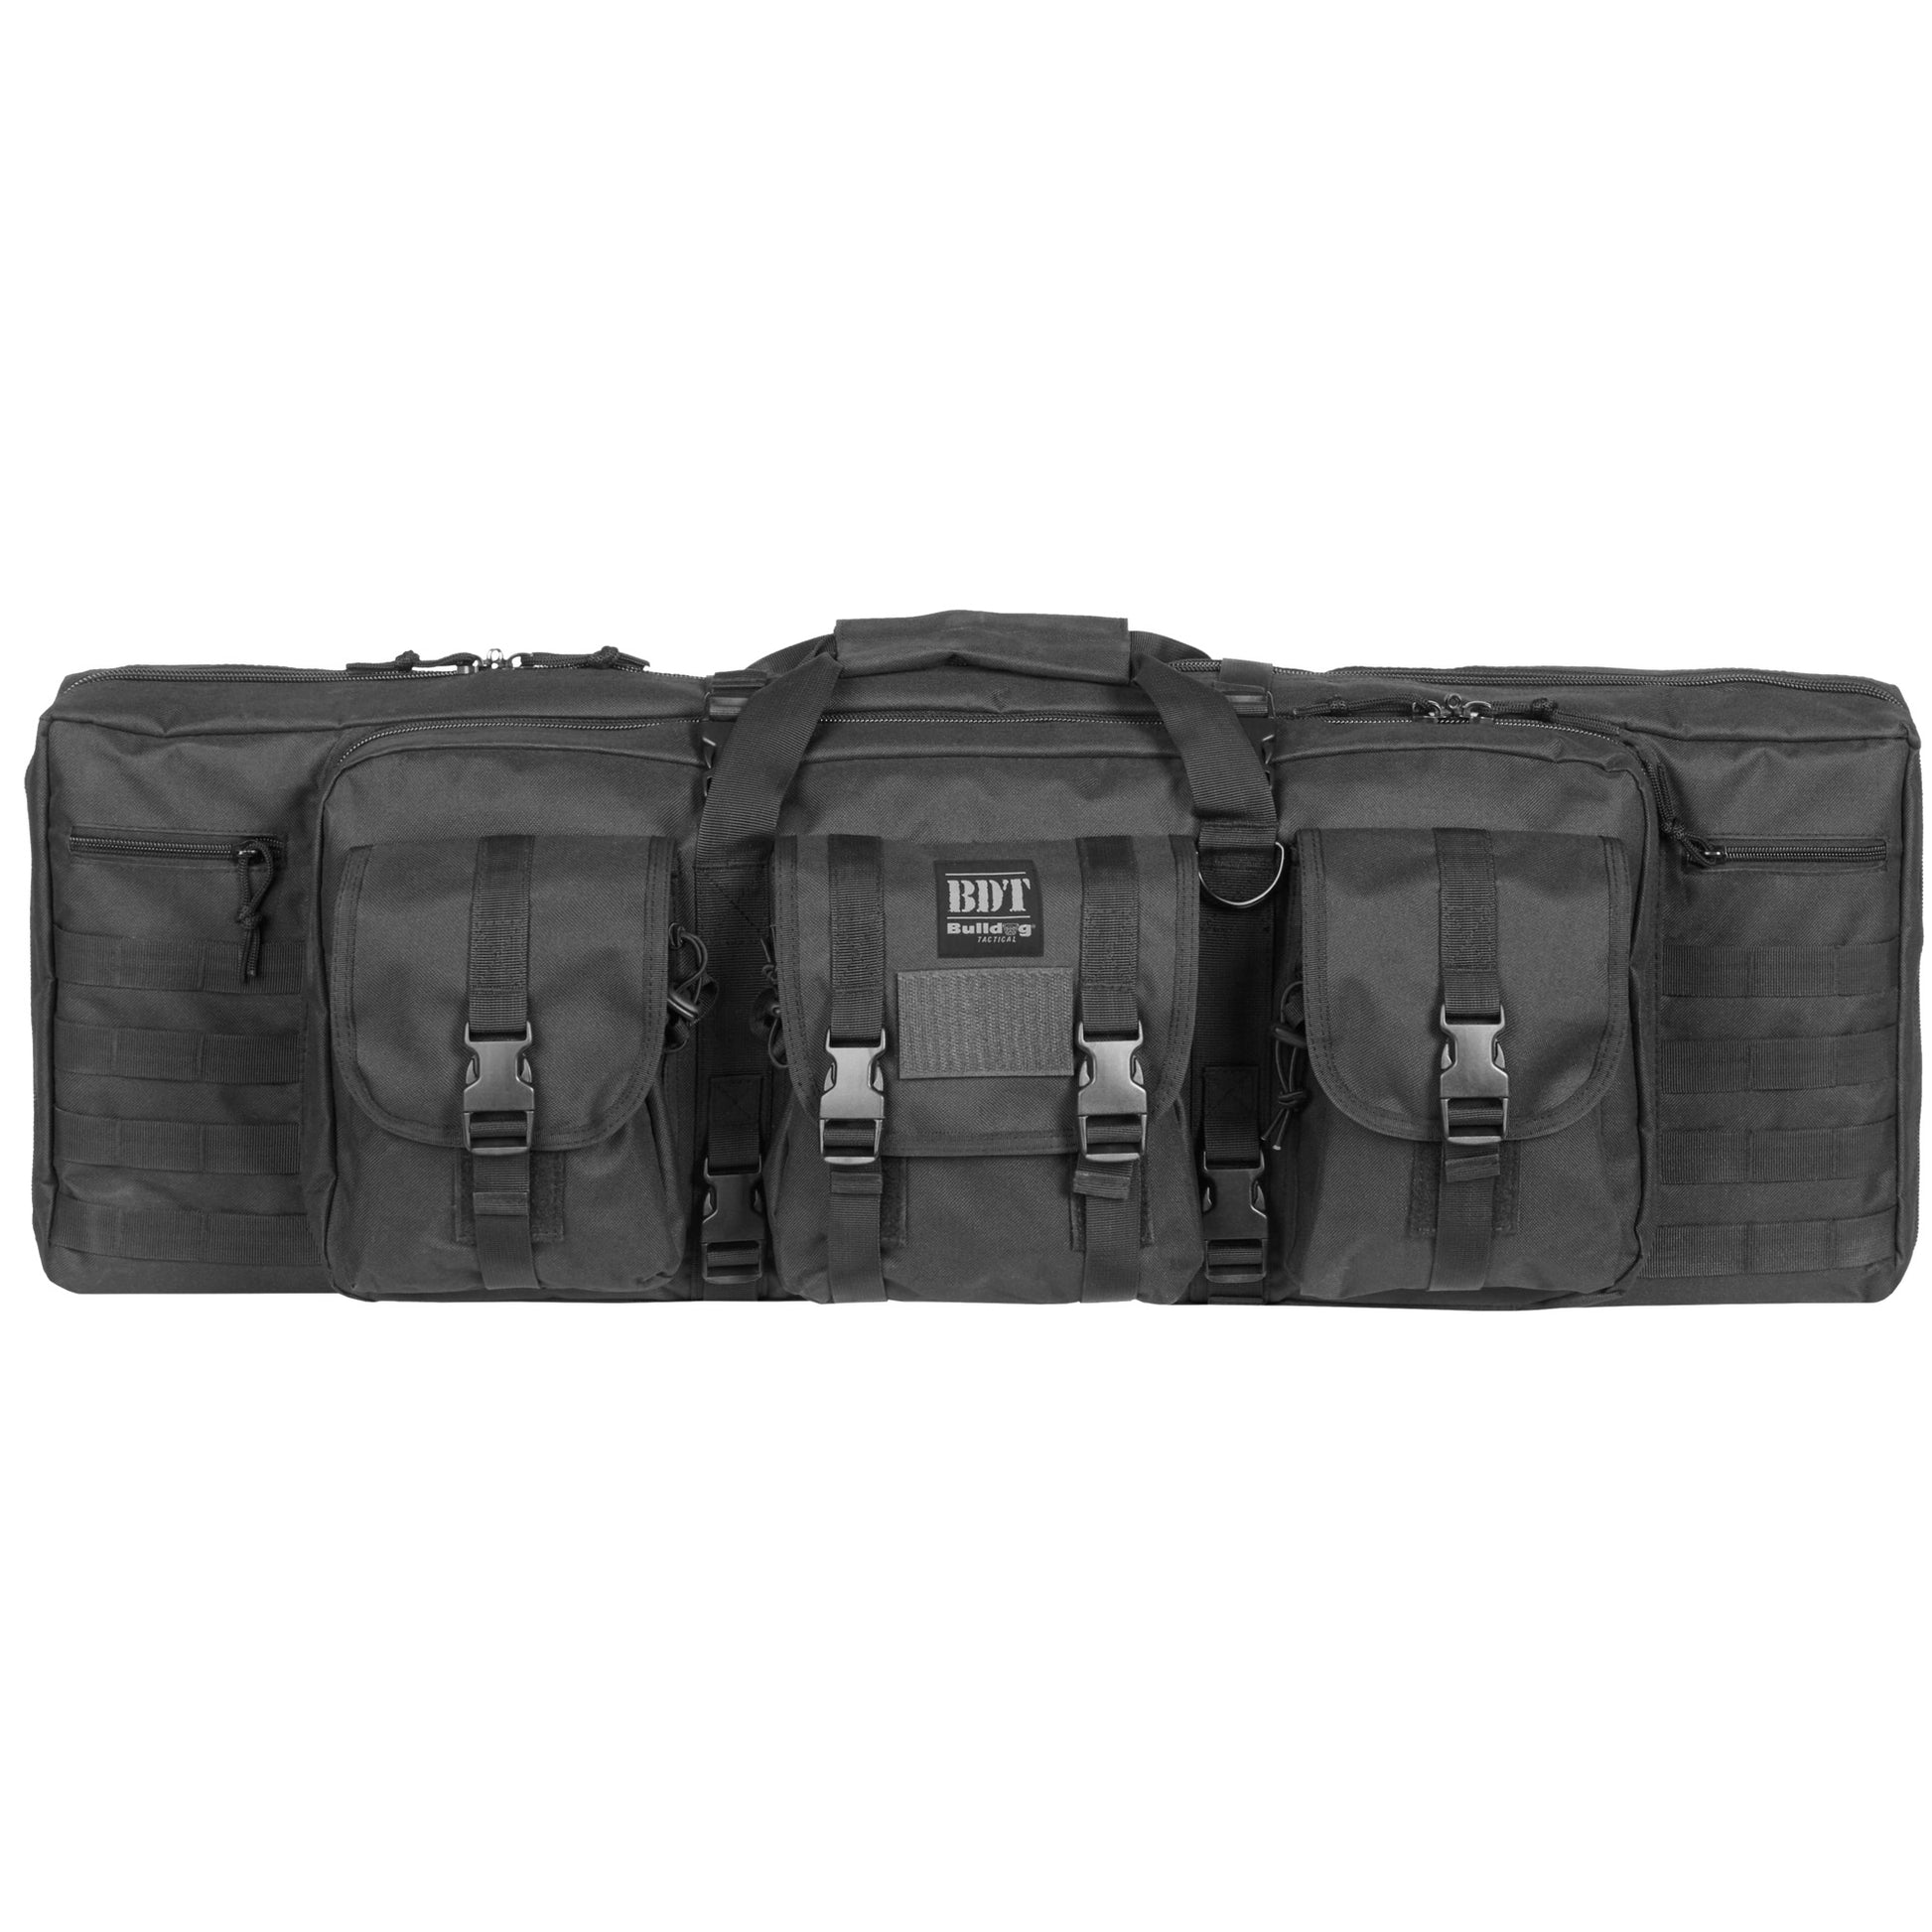 Bulldog Cases Deluxe Tactical Rifle Case Fits Single Rifle 36" Black BDT35-36B - California Shooting Supplies